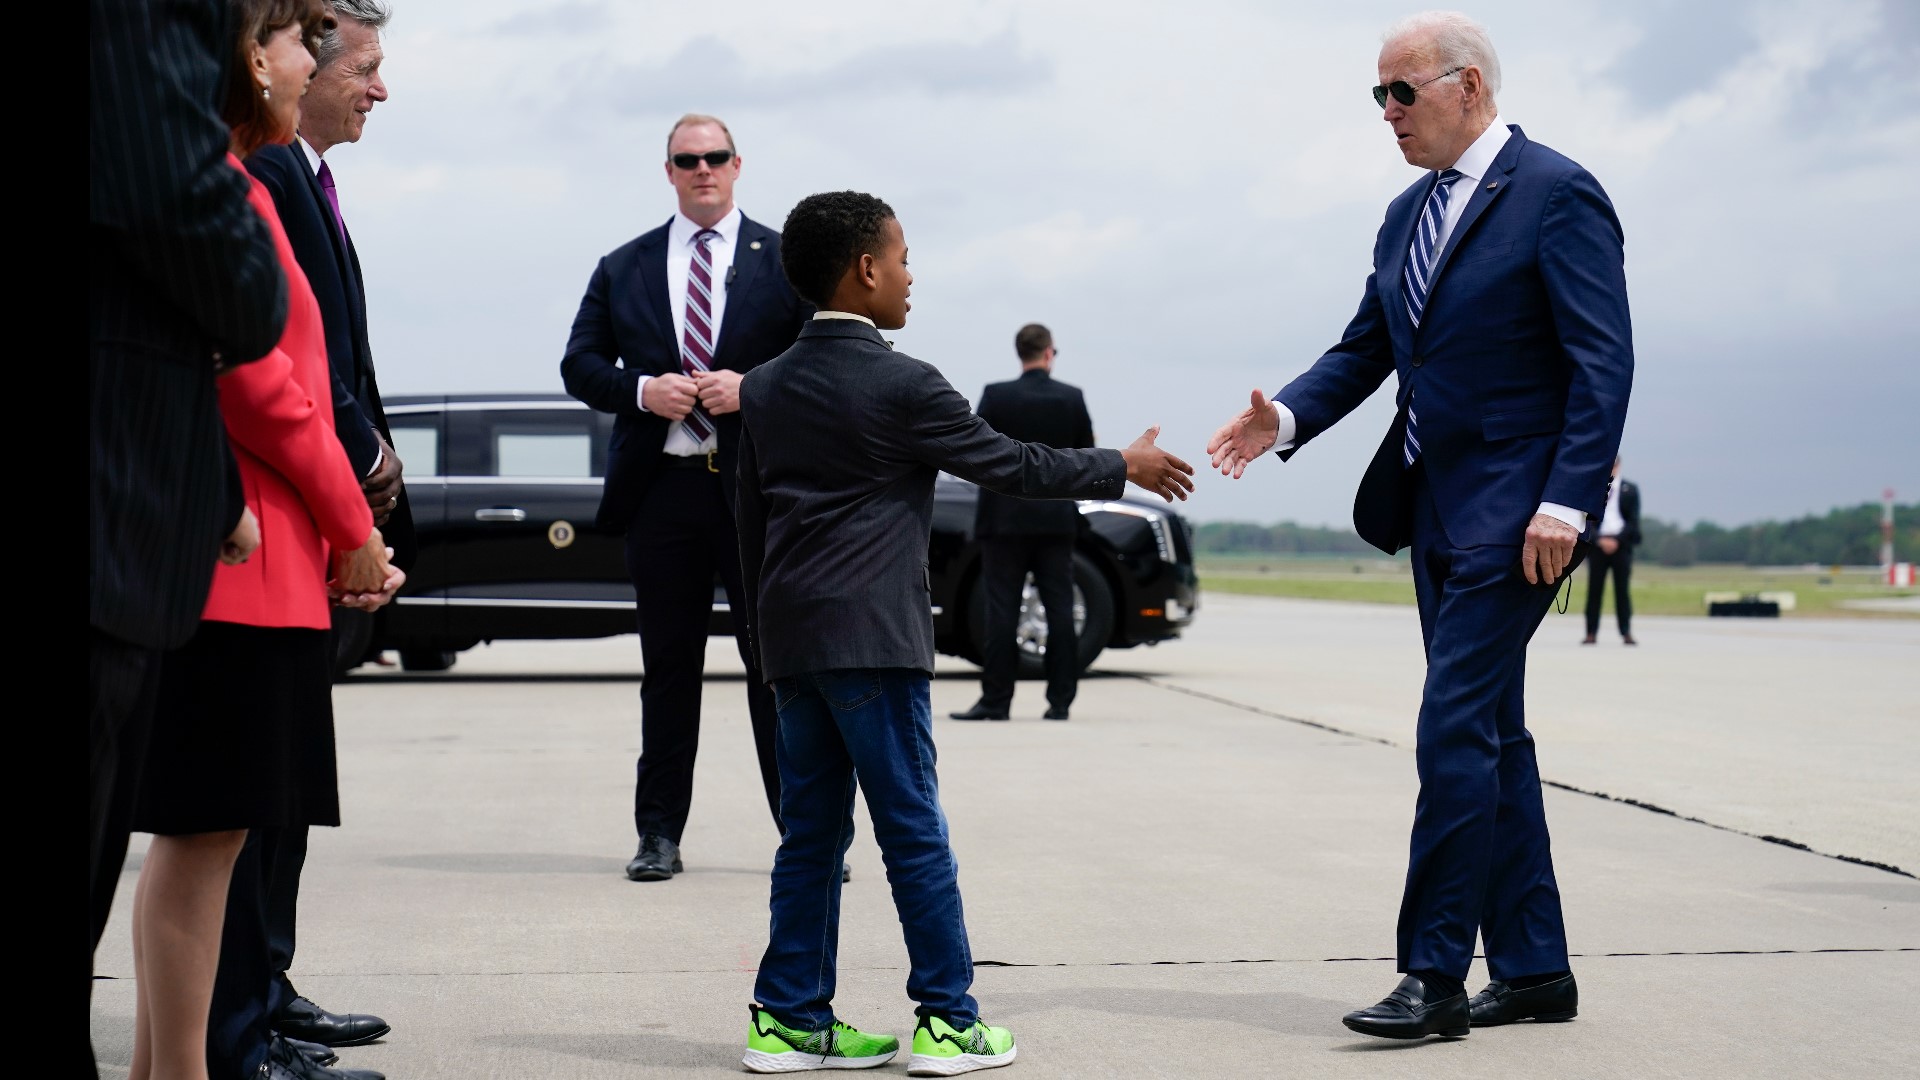 A 7-year-old boy can now tell all of his friends he has met the President of the United States.